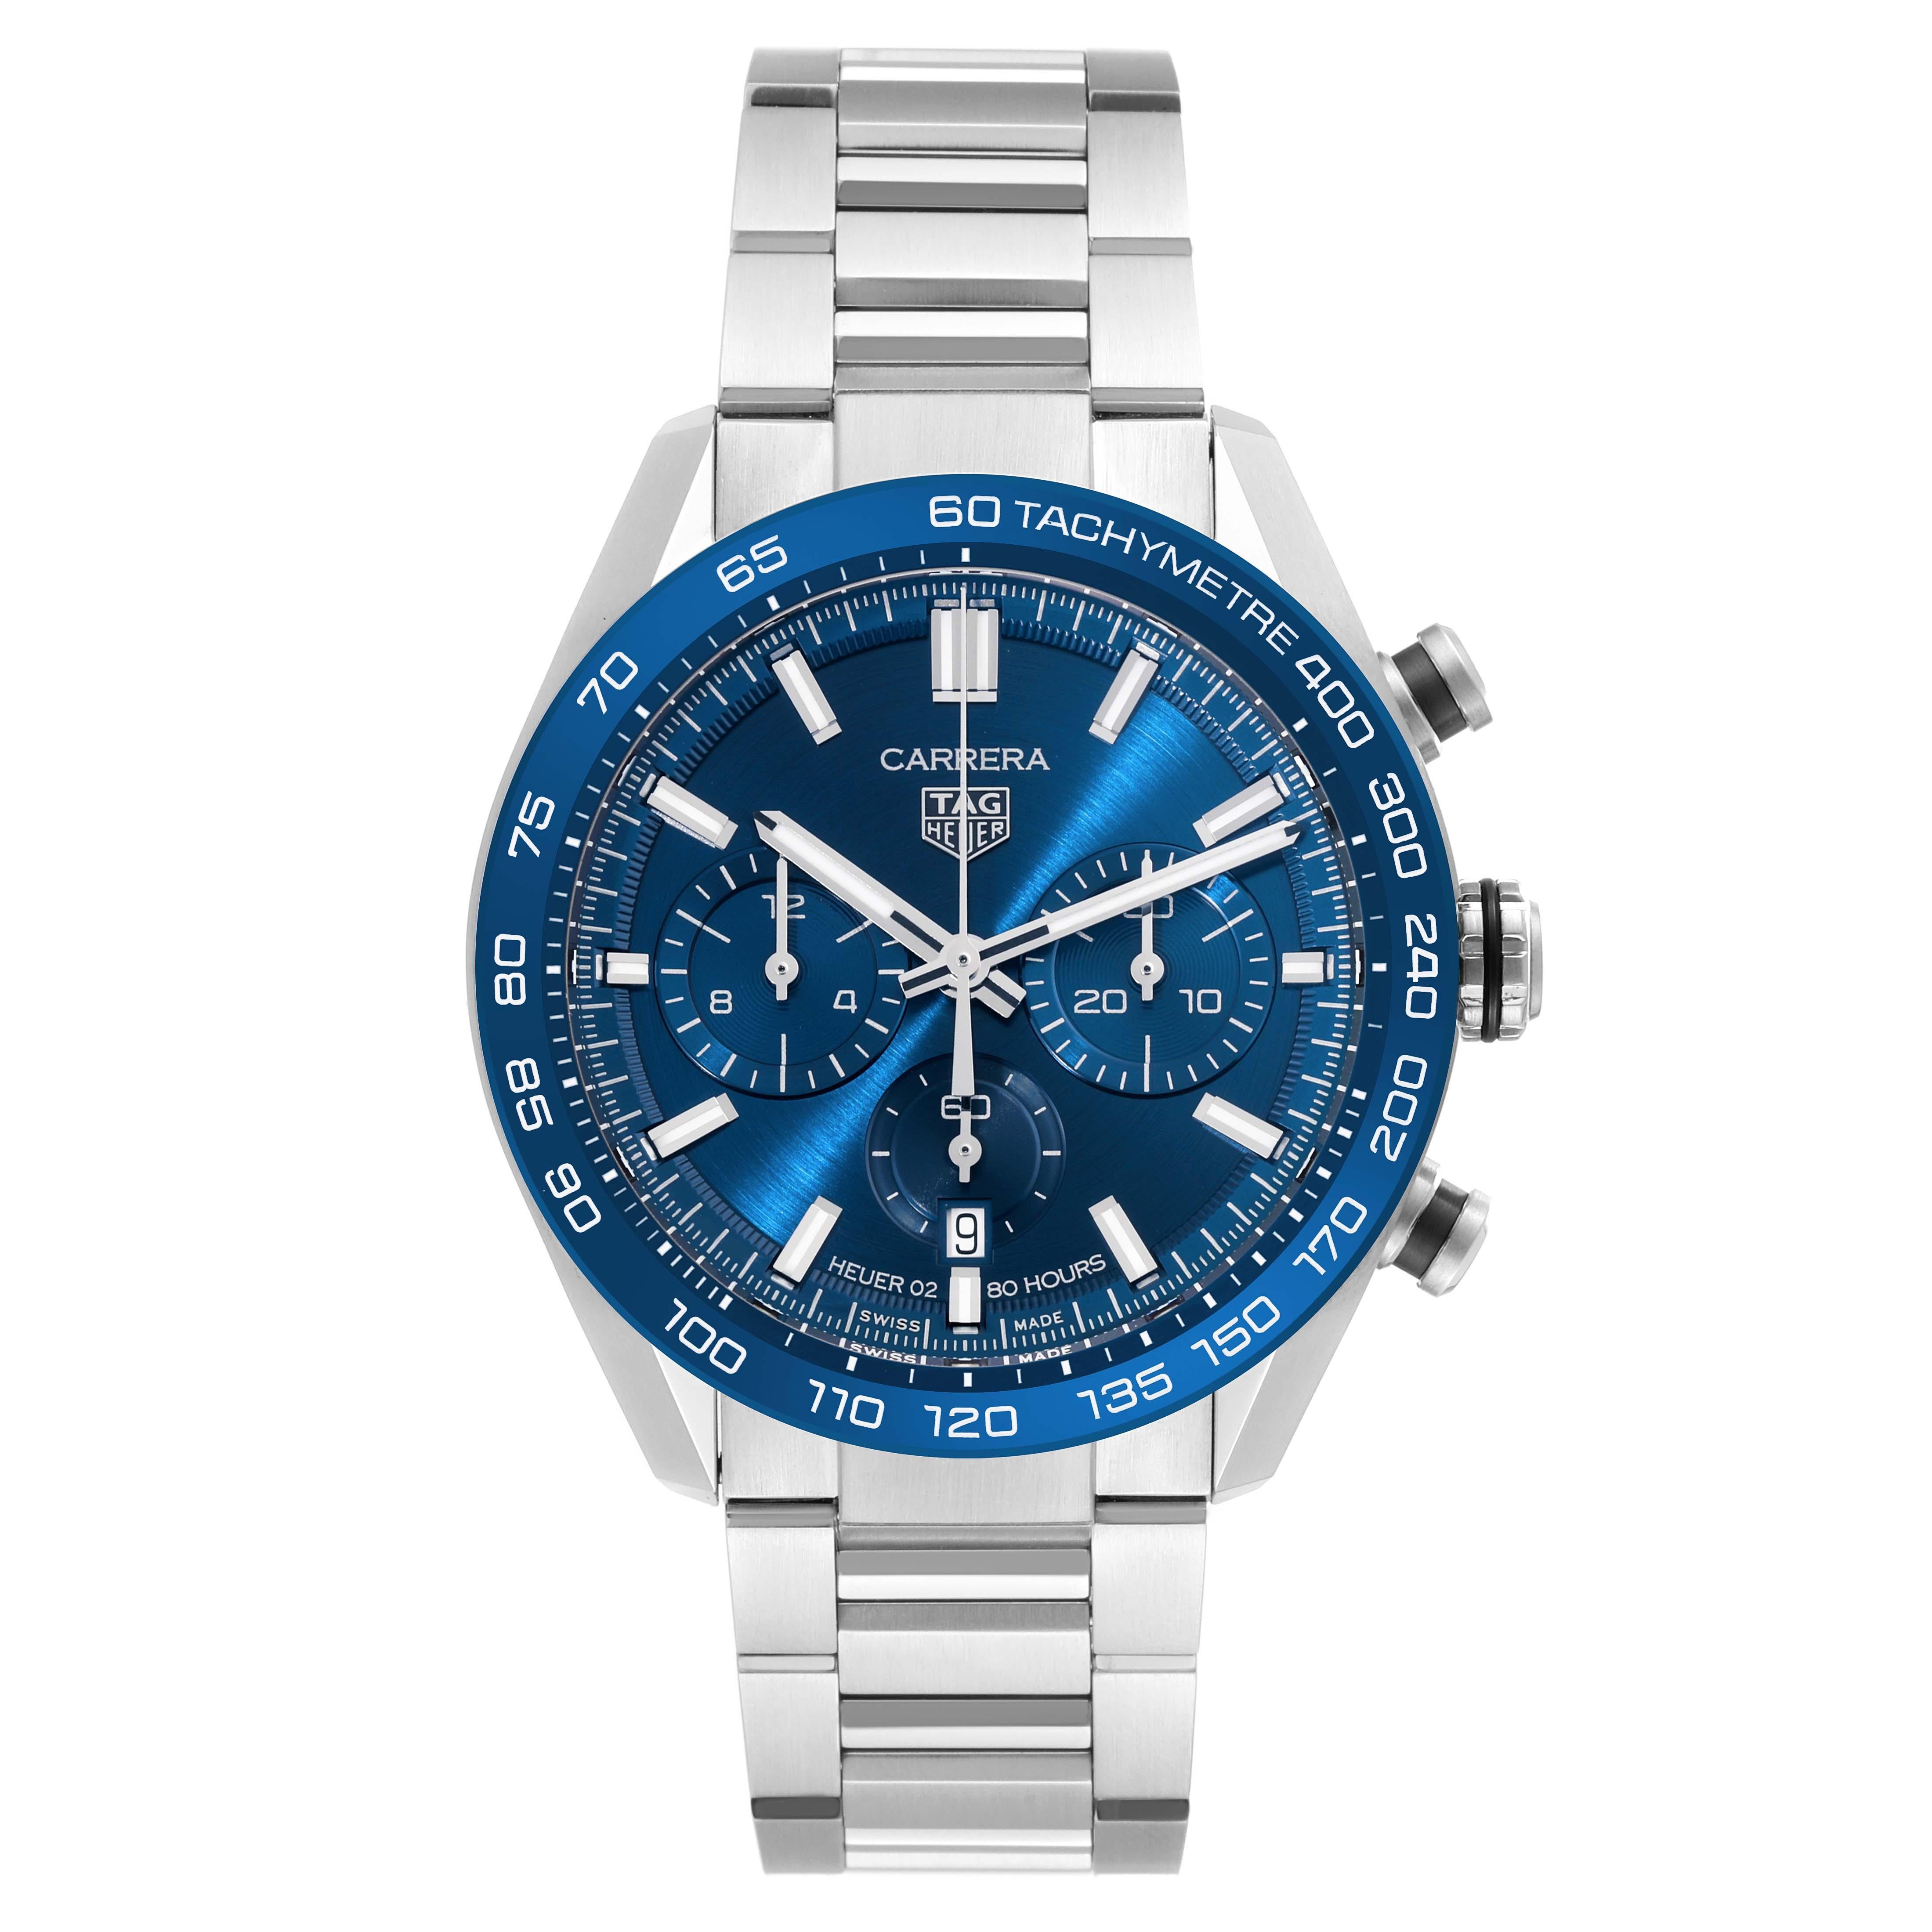 Tag Heuer Carrera Chronograph Blue Dial Steel Mens Watch CBN2A1A Box Card. Automatic self-winding chronograph movement. Stainless steel round case 44.0 mm. Transparent exhibition sapphire crystal caseback. Blue ceramic tachymeter scale bezel.